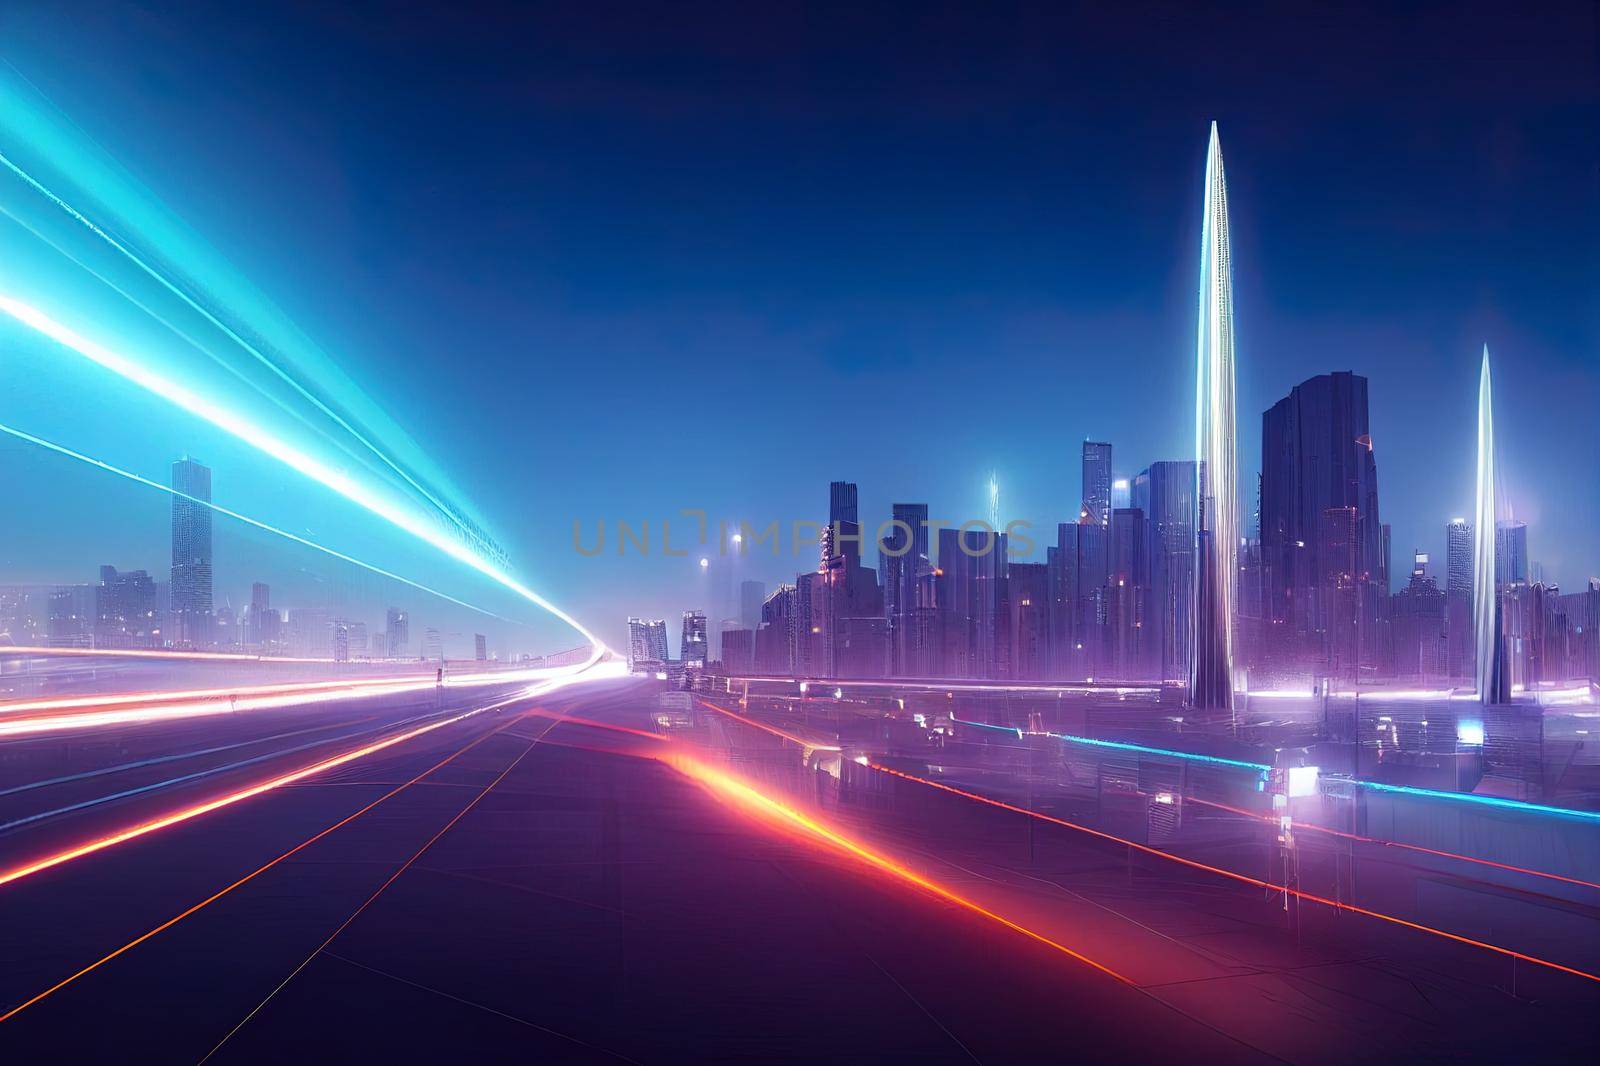 3D Rendering of warp speed in hyper loop with blur light from buildings' lights in mega city at night. Concept of next generation technology, fin tech, big data, 5g fast network, machine learning. High quality illustration